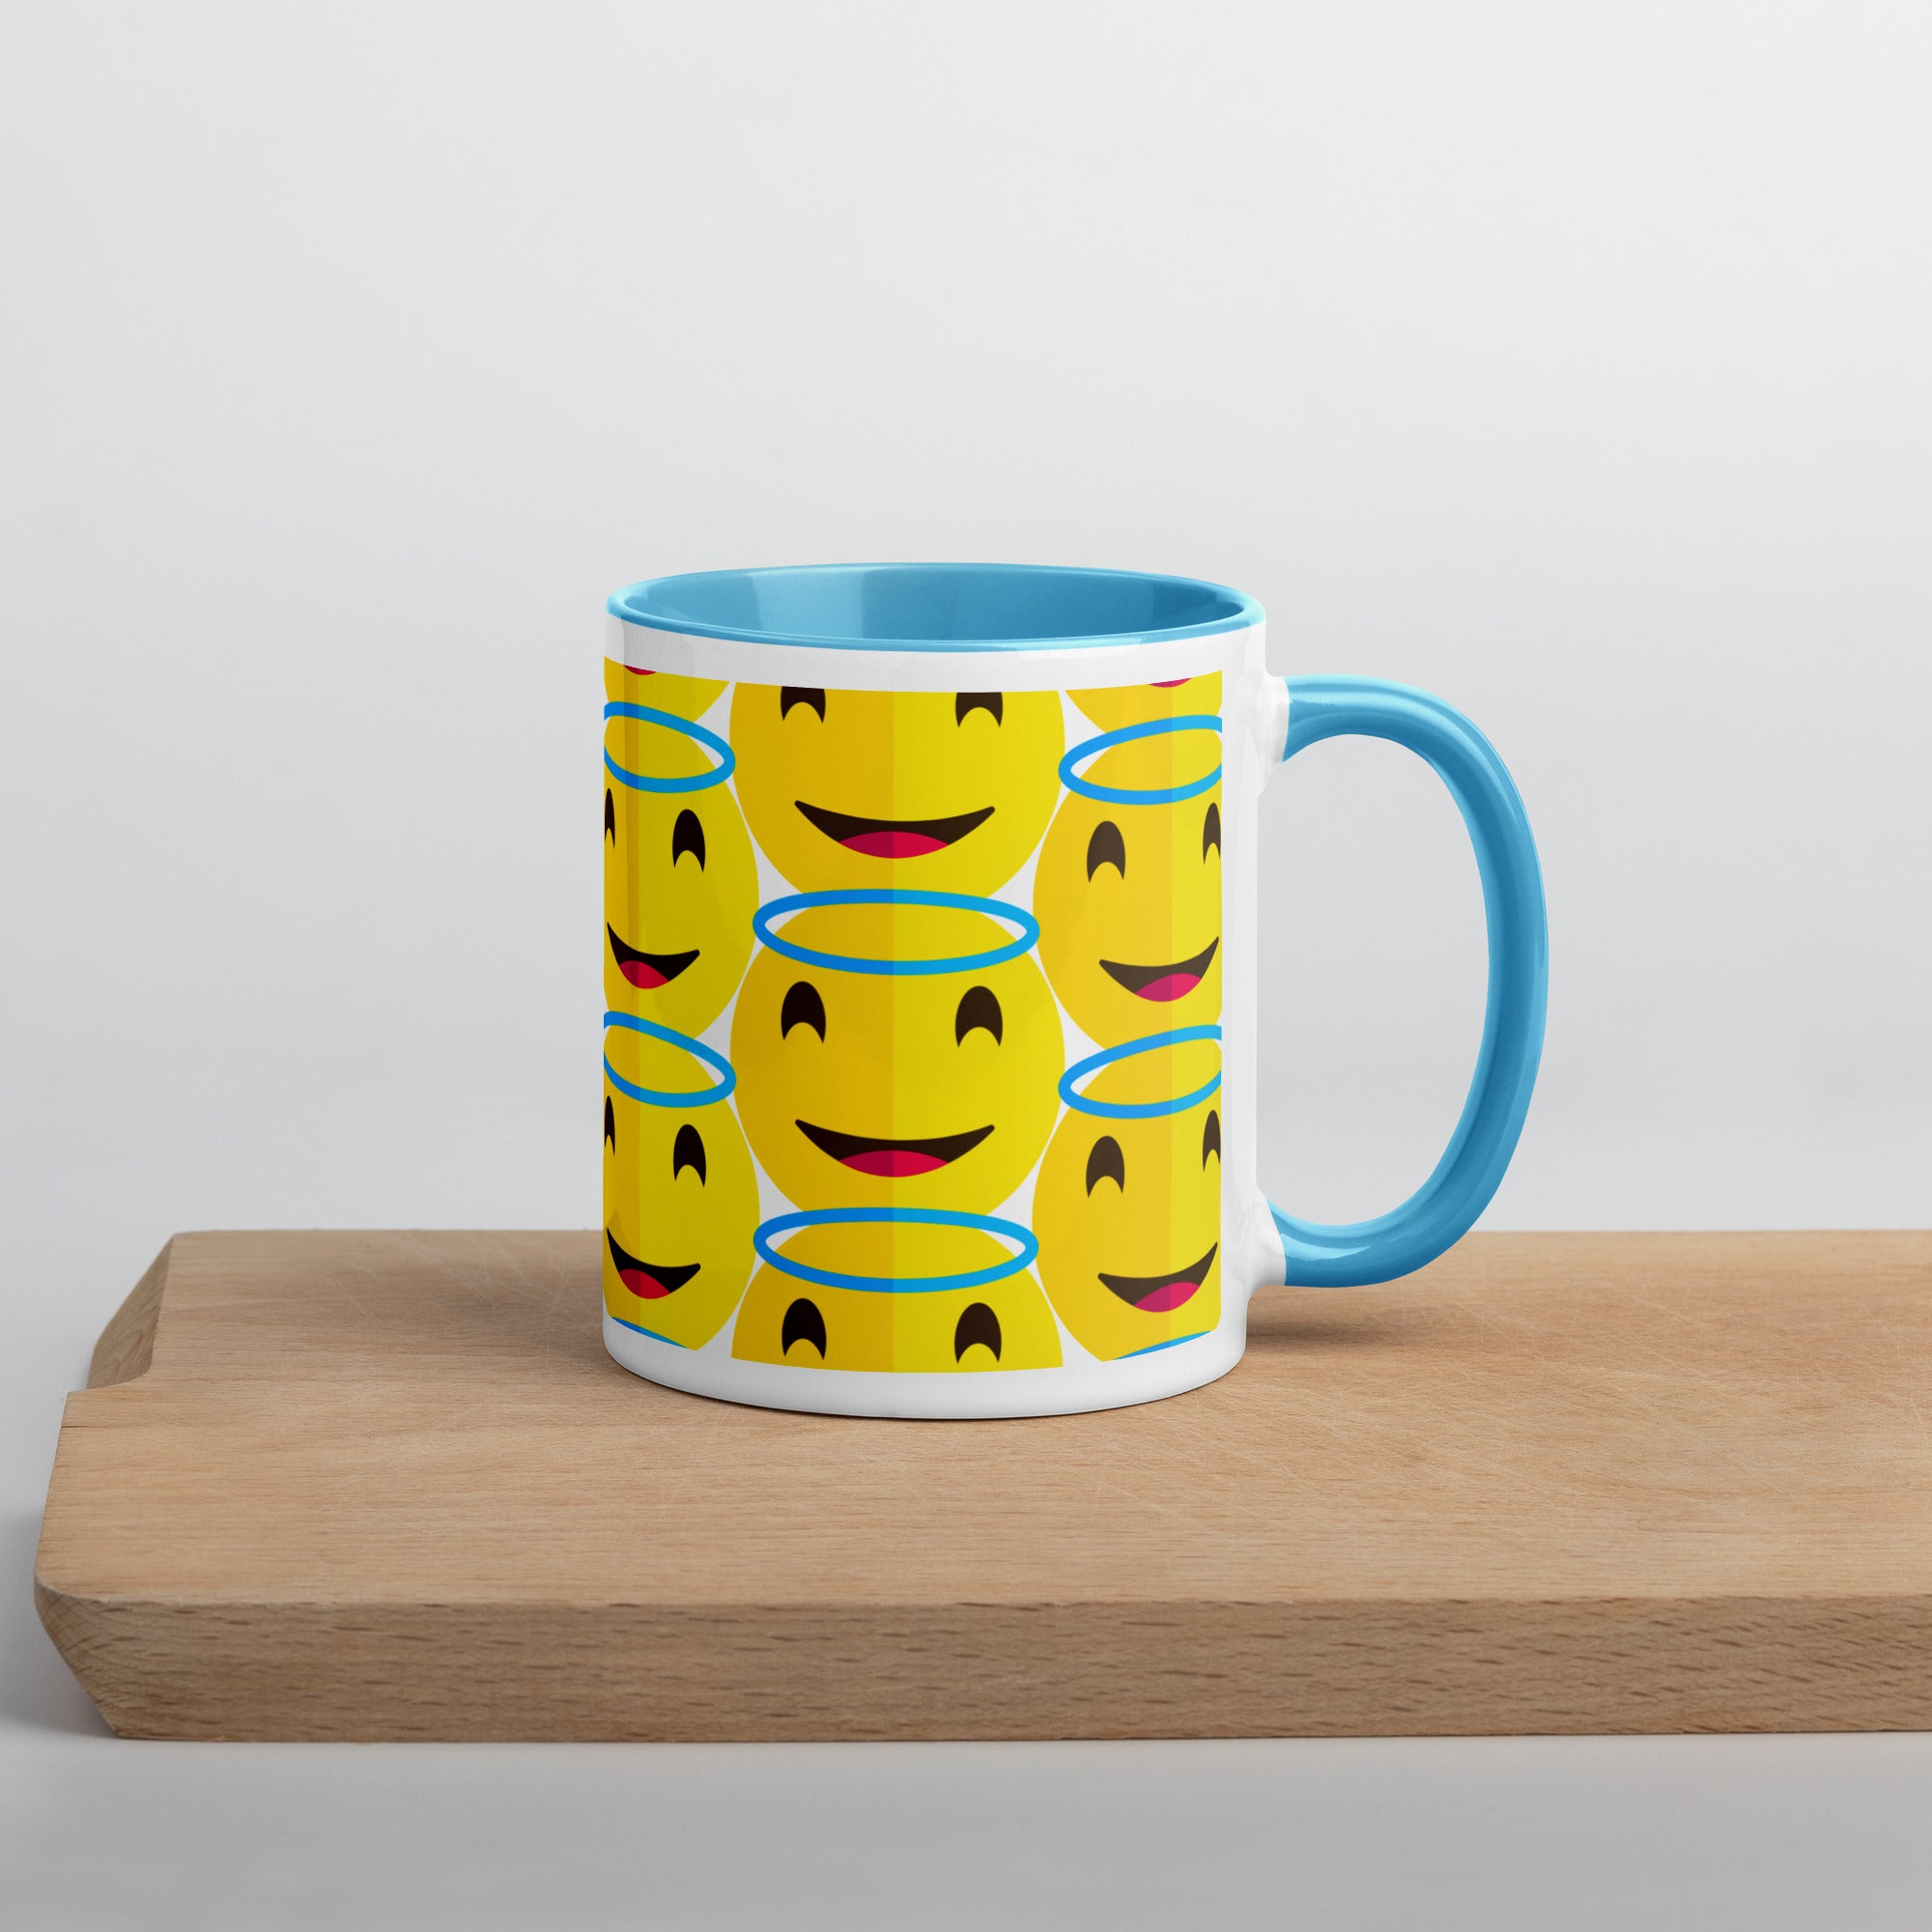 Mug with Color Inside, Smile Cup, Gift